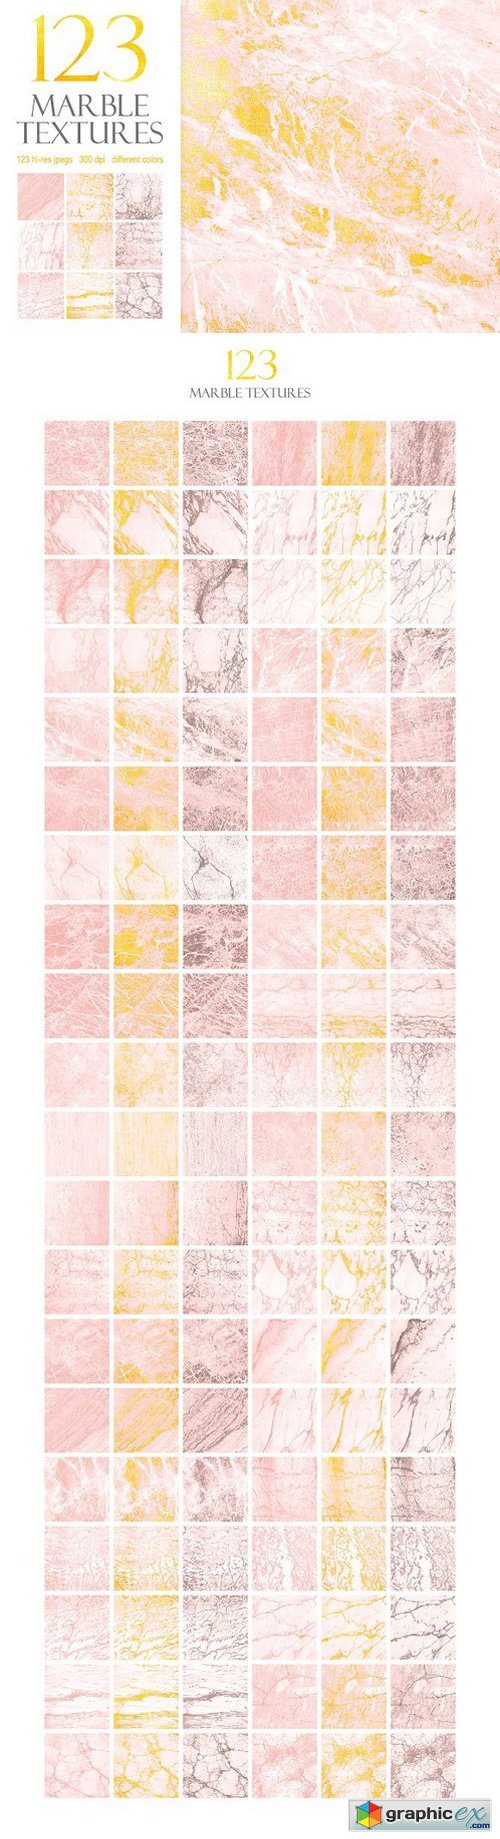 123 Marble Pink & Gold Textures